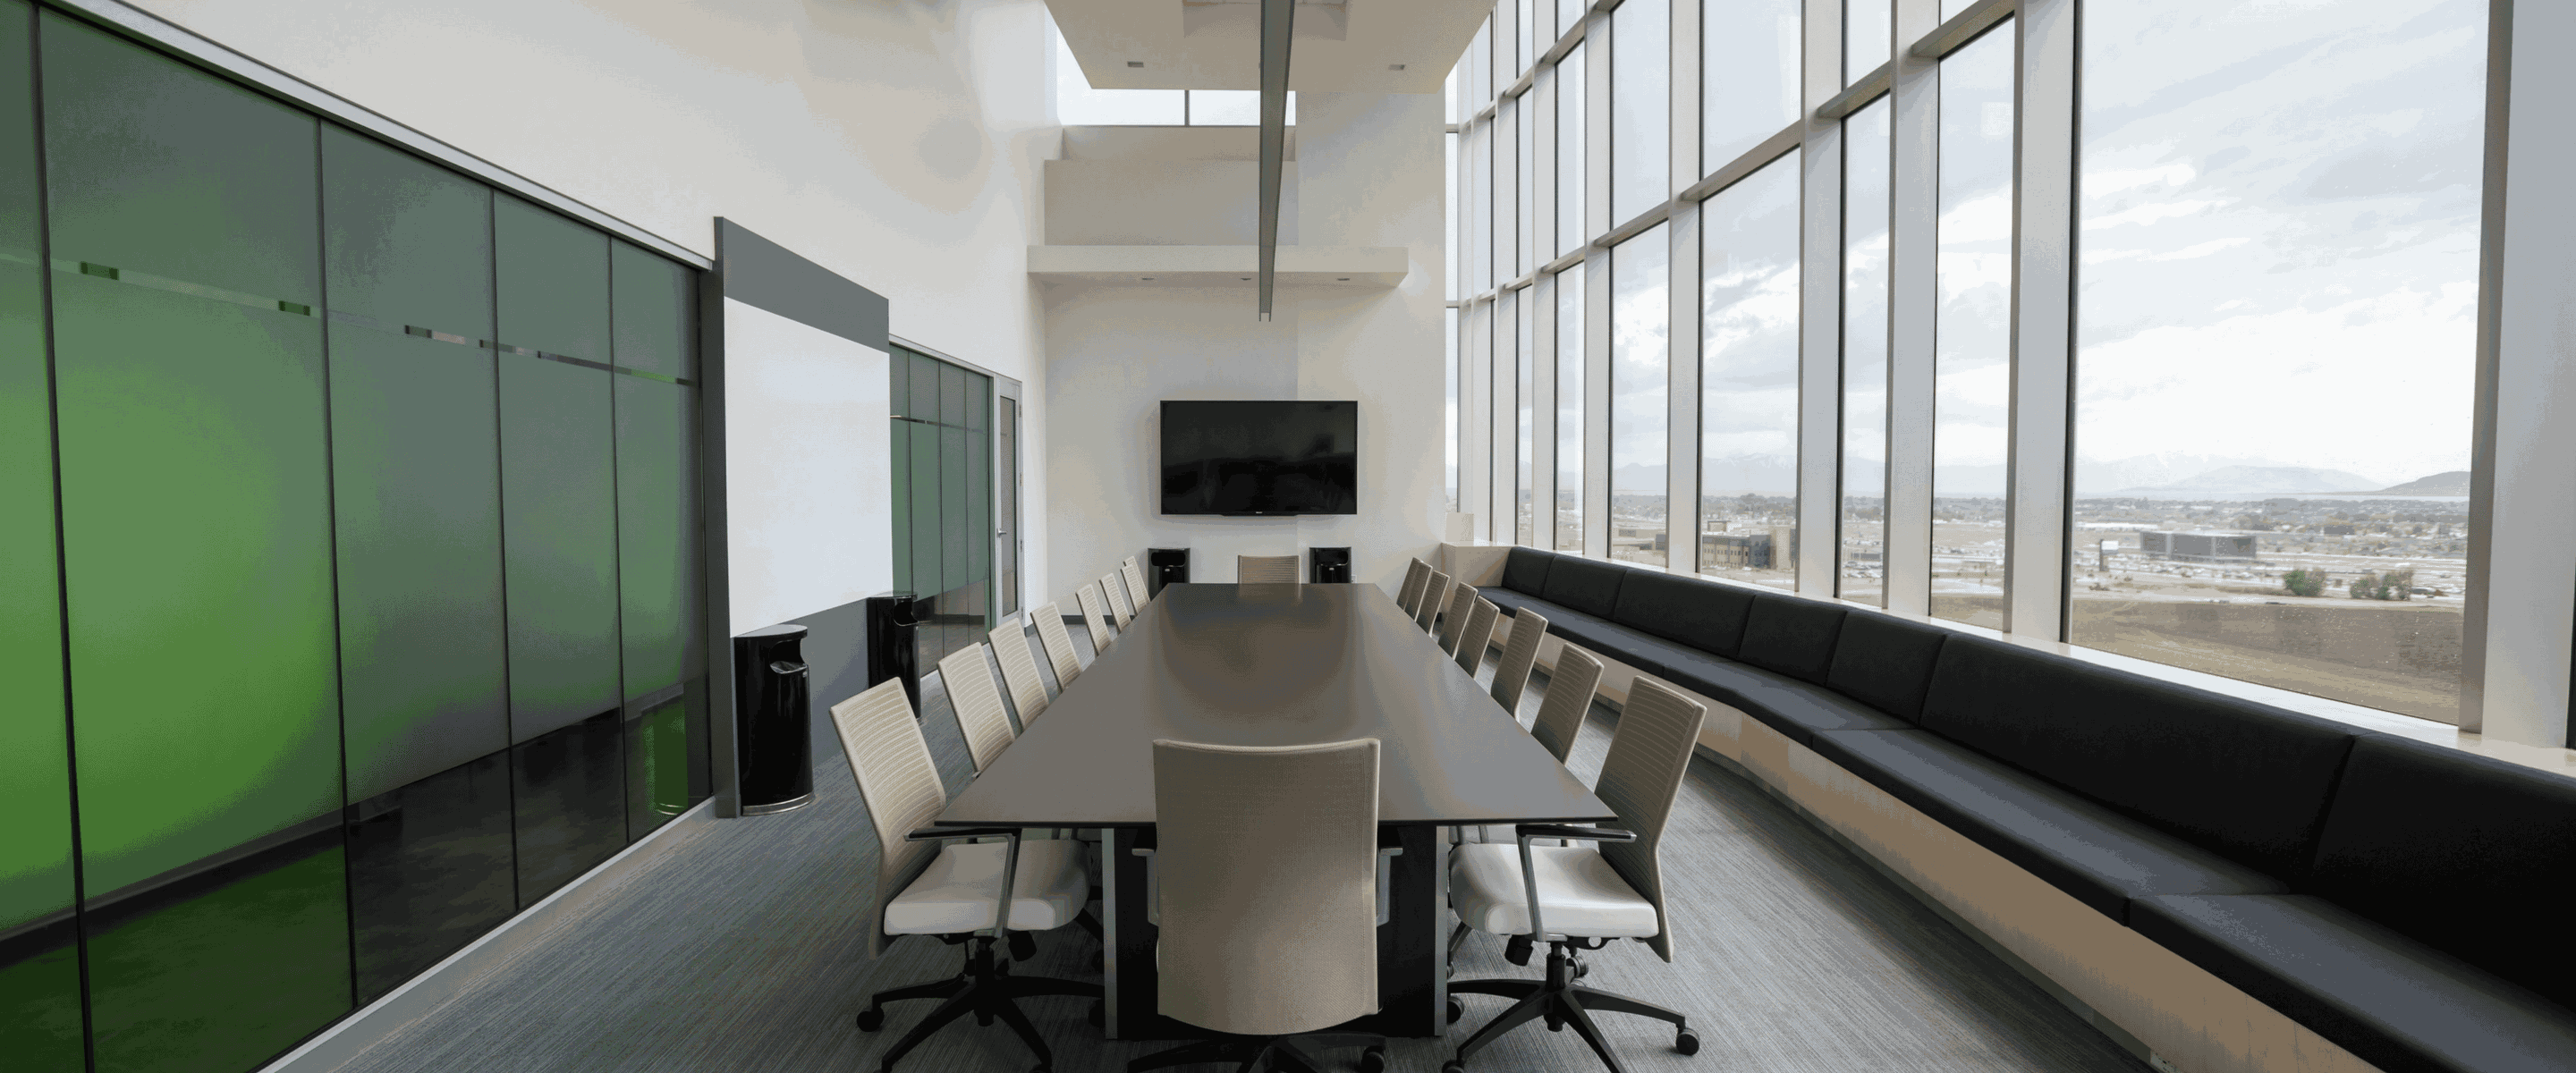 ada employer guide conference room